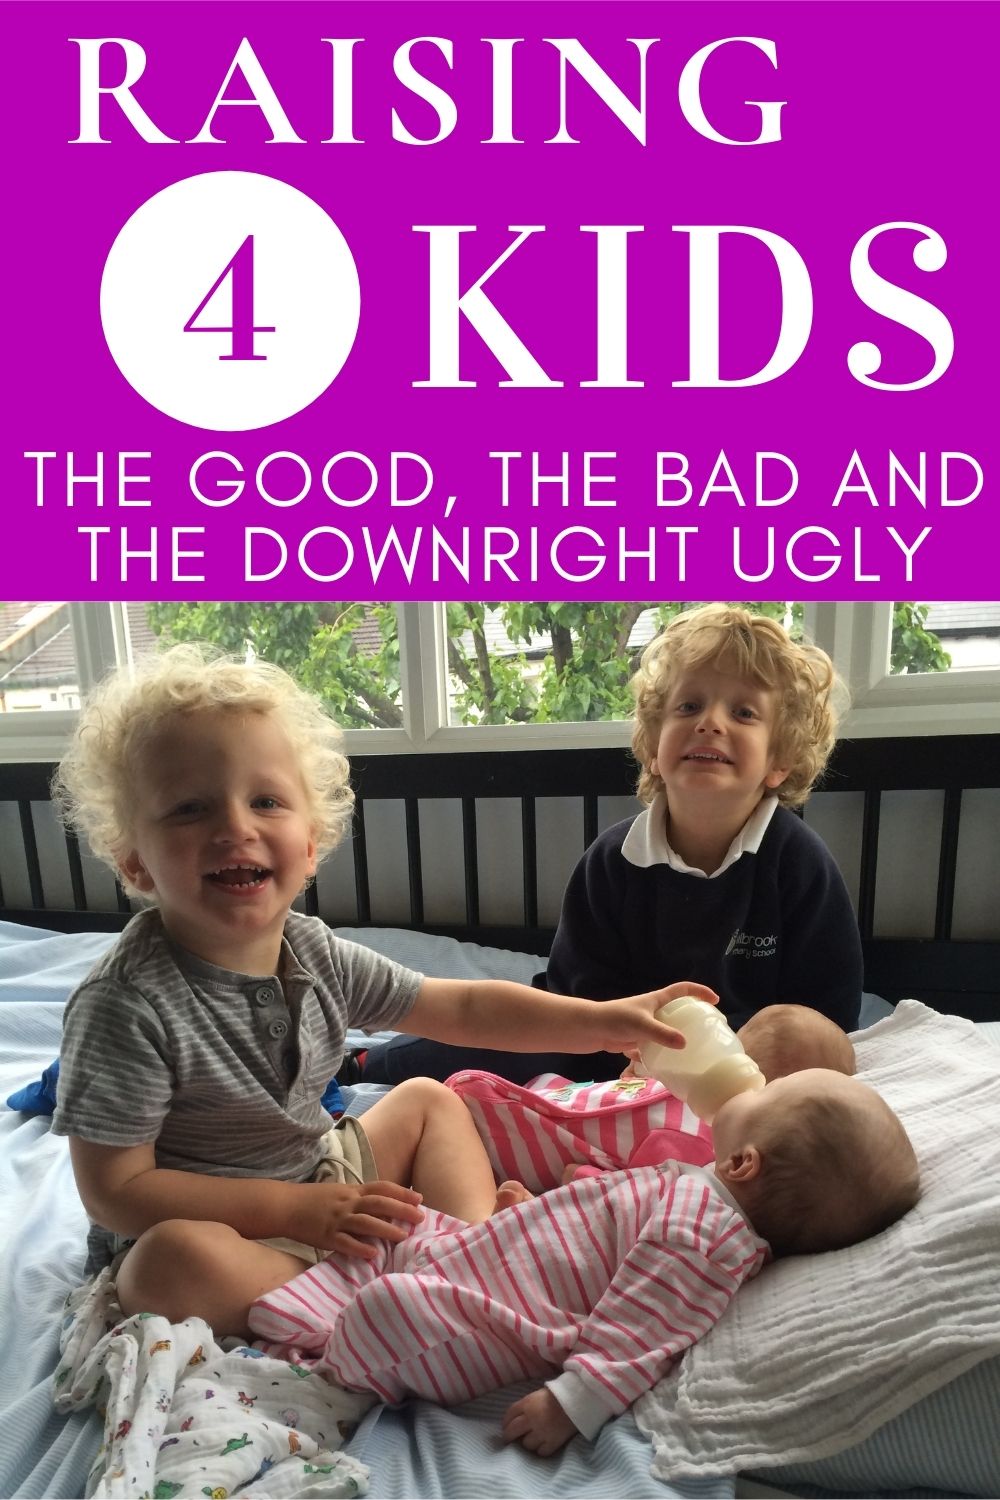 Having four kids pros and cons